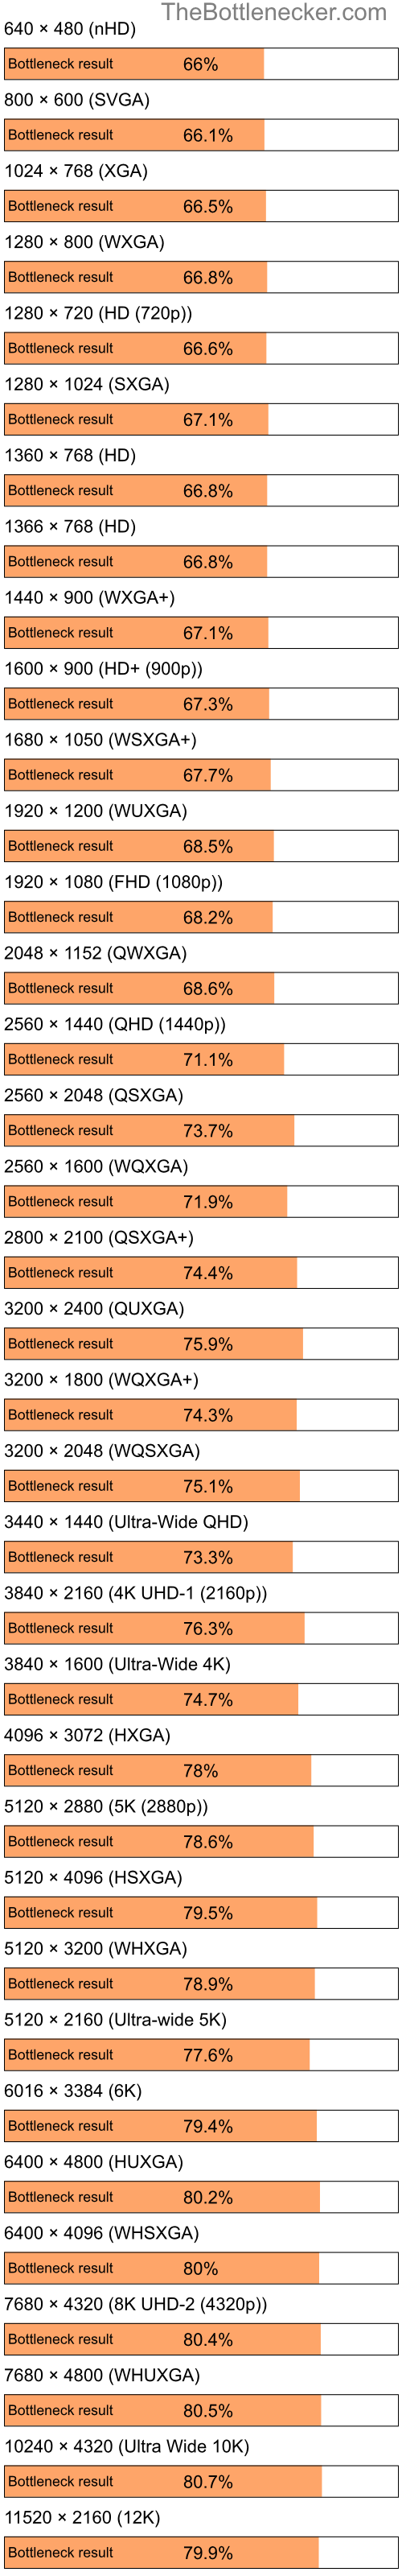 Bottleneck results by resolution for Intel Pentium 4 and Intel G33 in Processor Intense Tasks